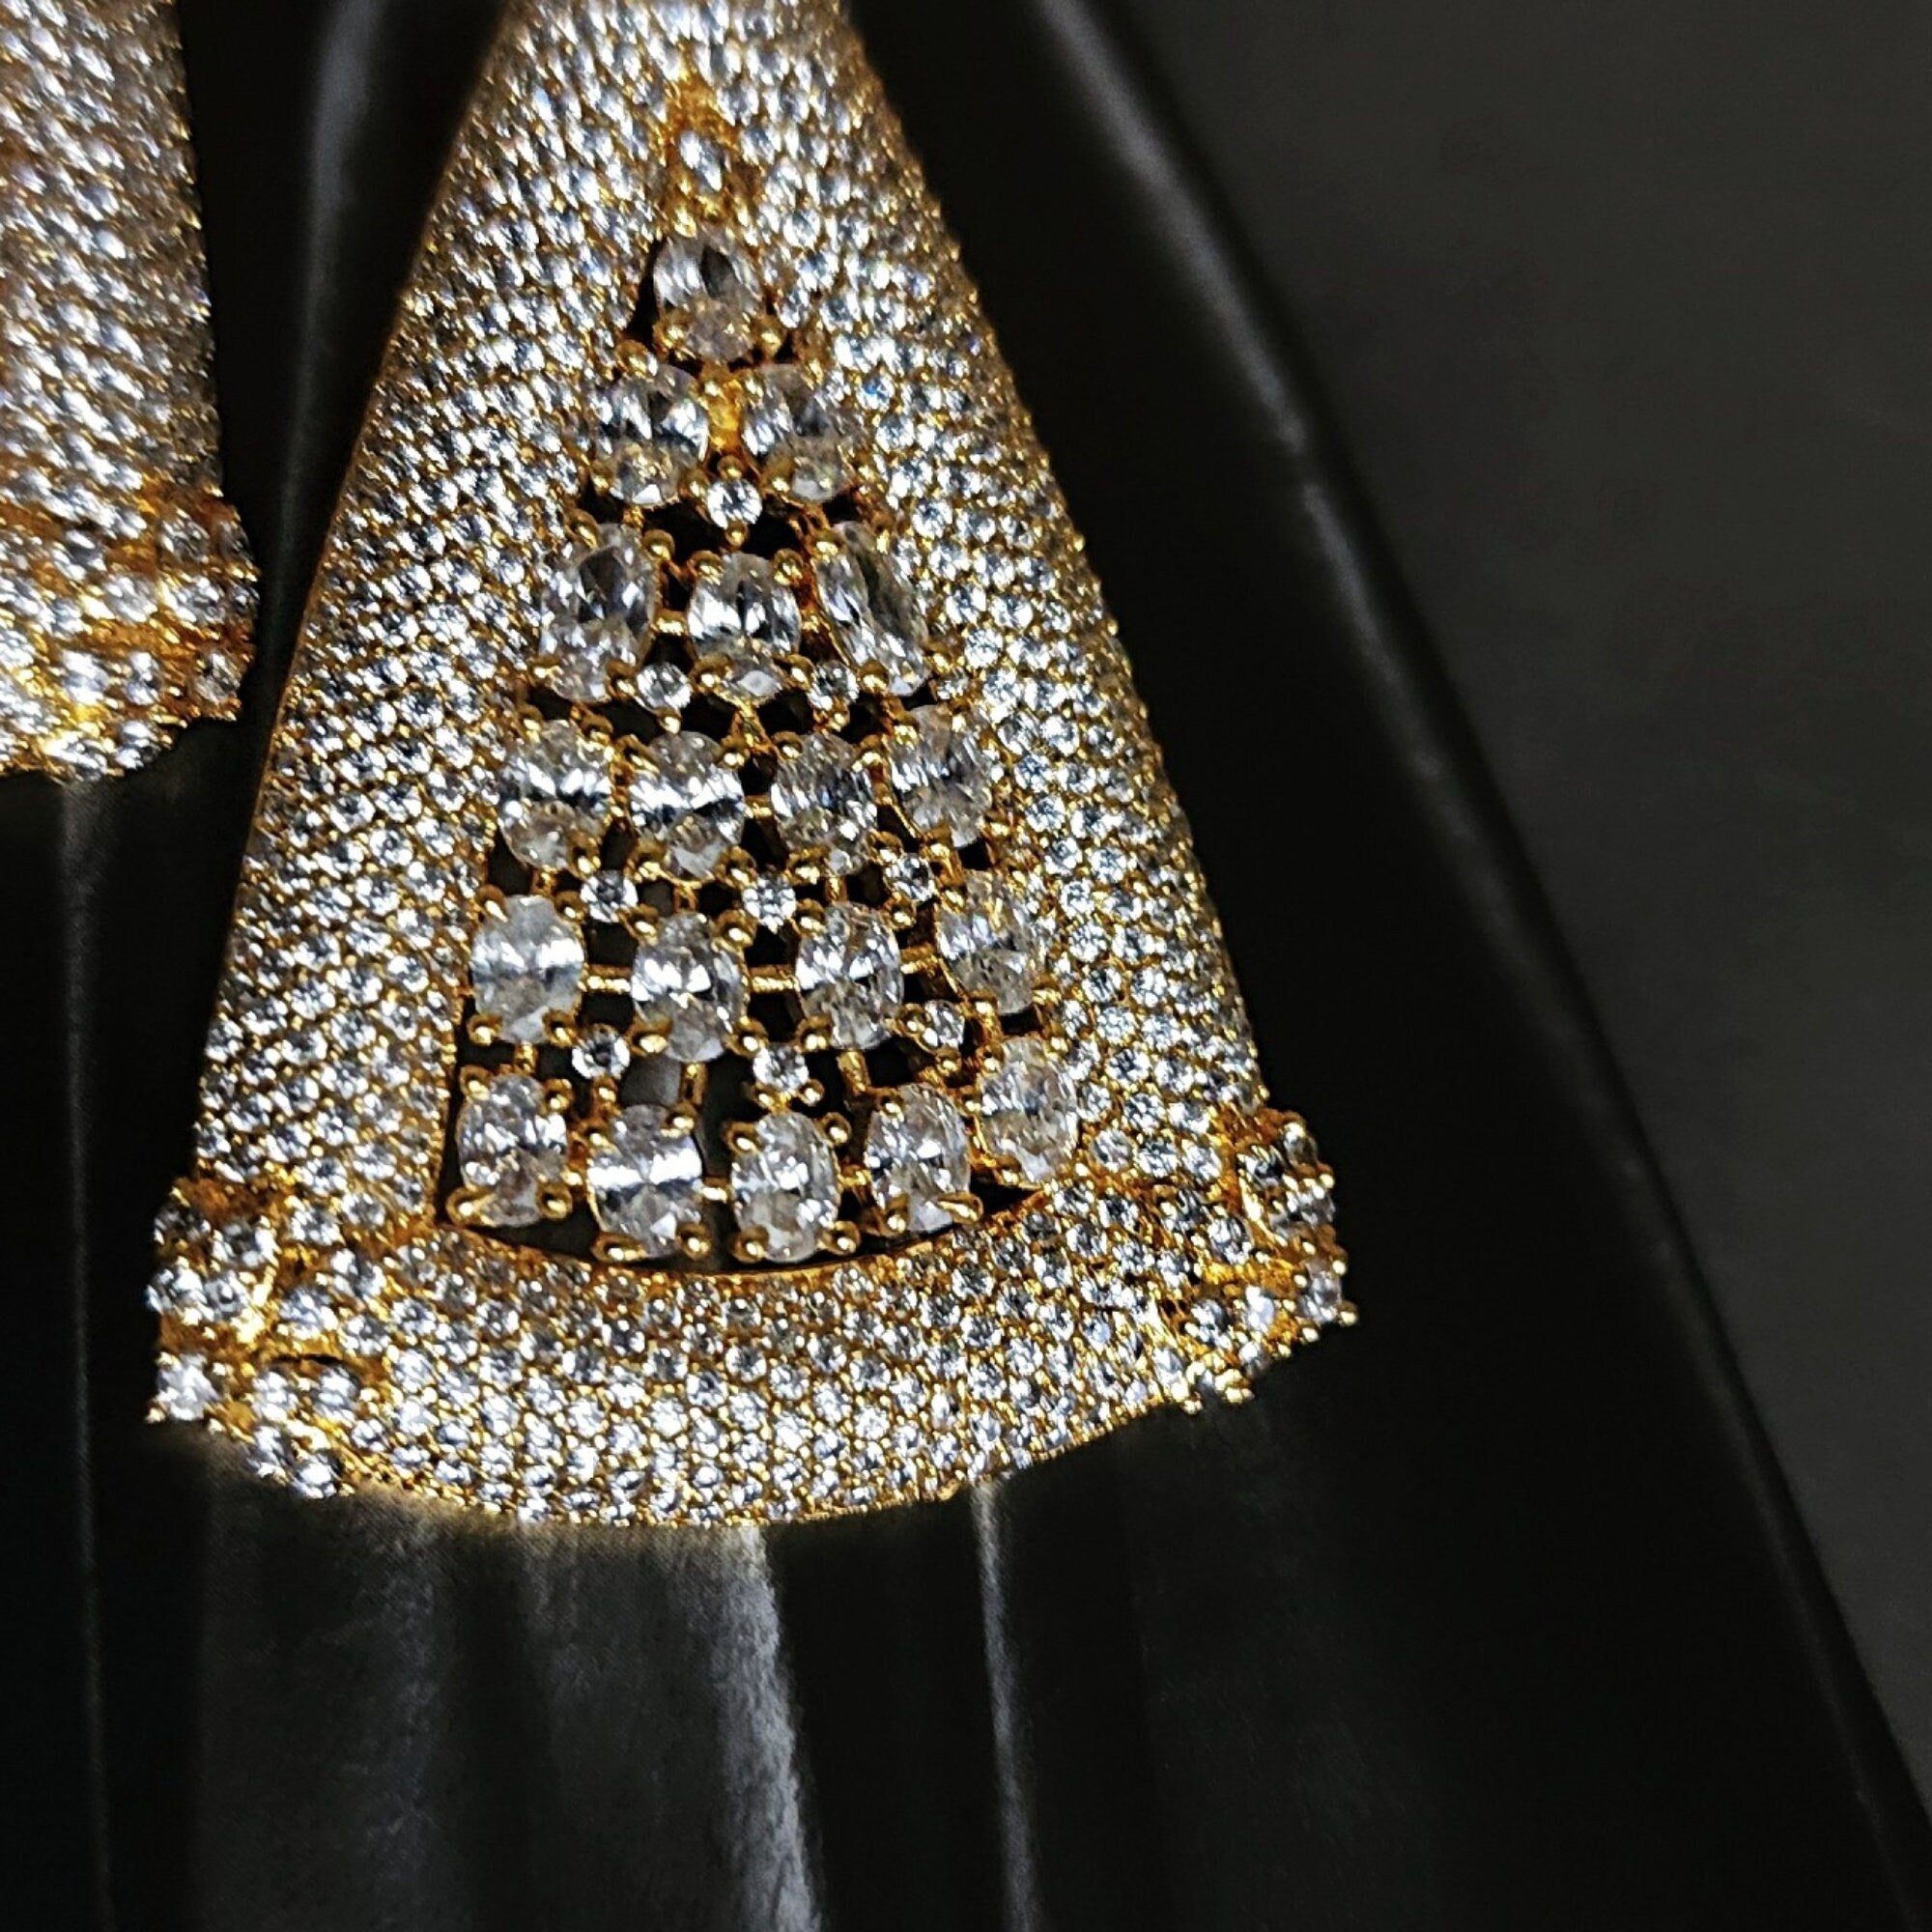 Brilliant! 18K White Yellow Gold Plated Pave Illusion Stones Triangle Dangling Drop Earrings, Wedding Earrings,Couture,Eyptian Revival Style